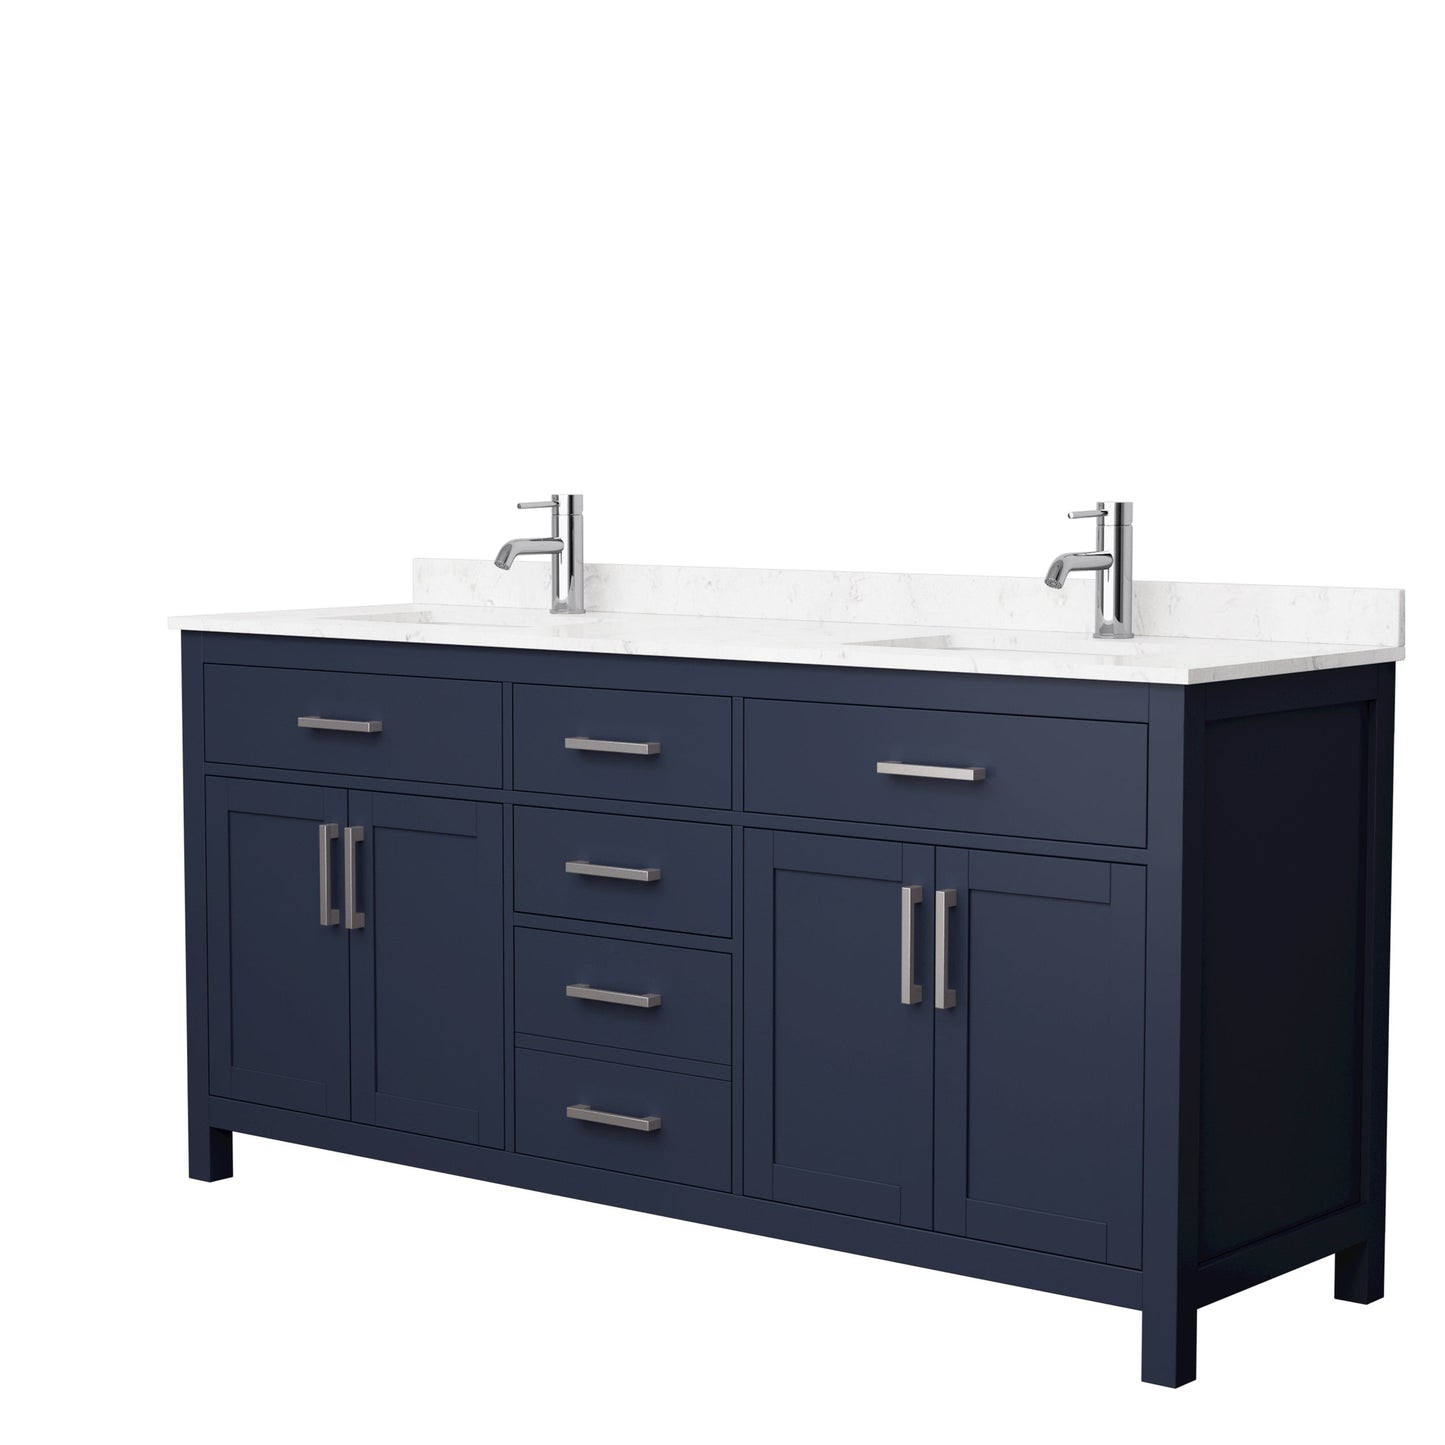 Wyndham Collection Beckett 72" Double Bathroom Dark Blue Vanity With White Carrara Cultured Marble Countertop, Undermount Square Sink And Brushed Nickel Trim